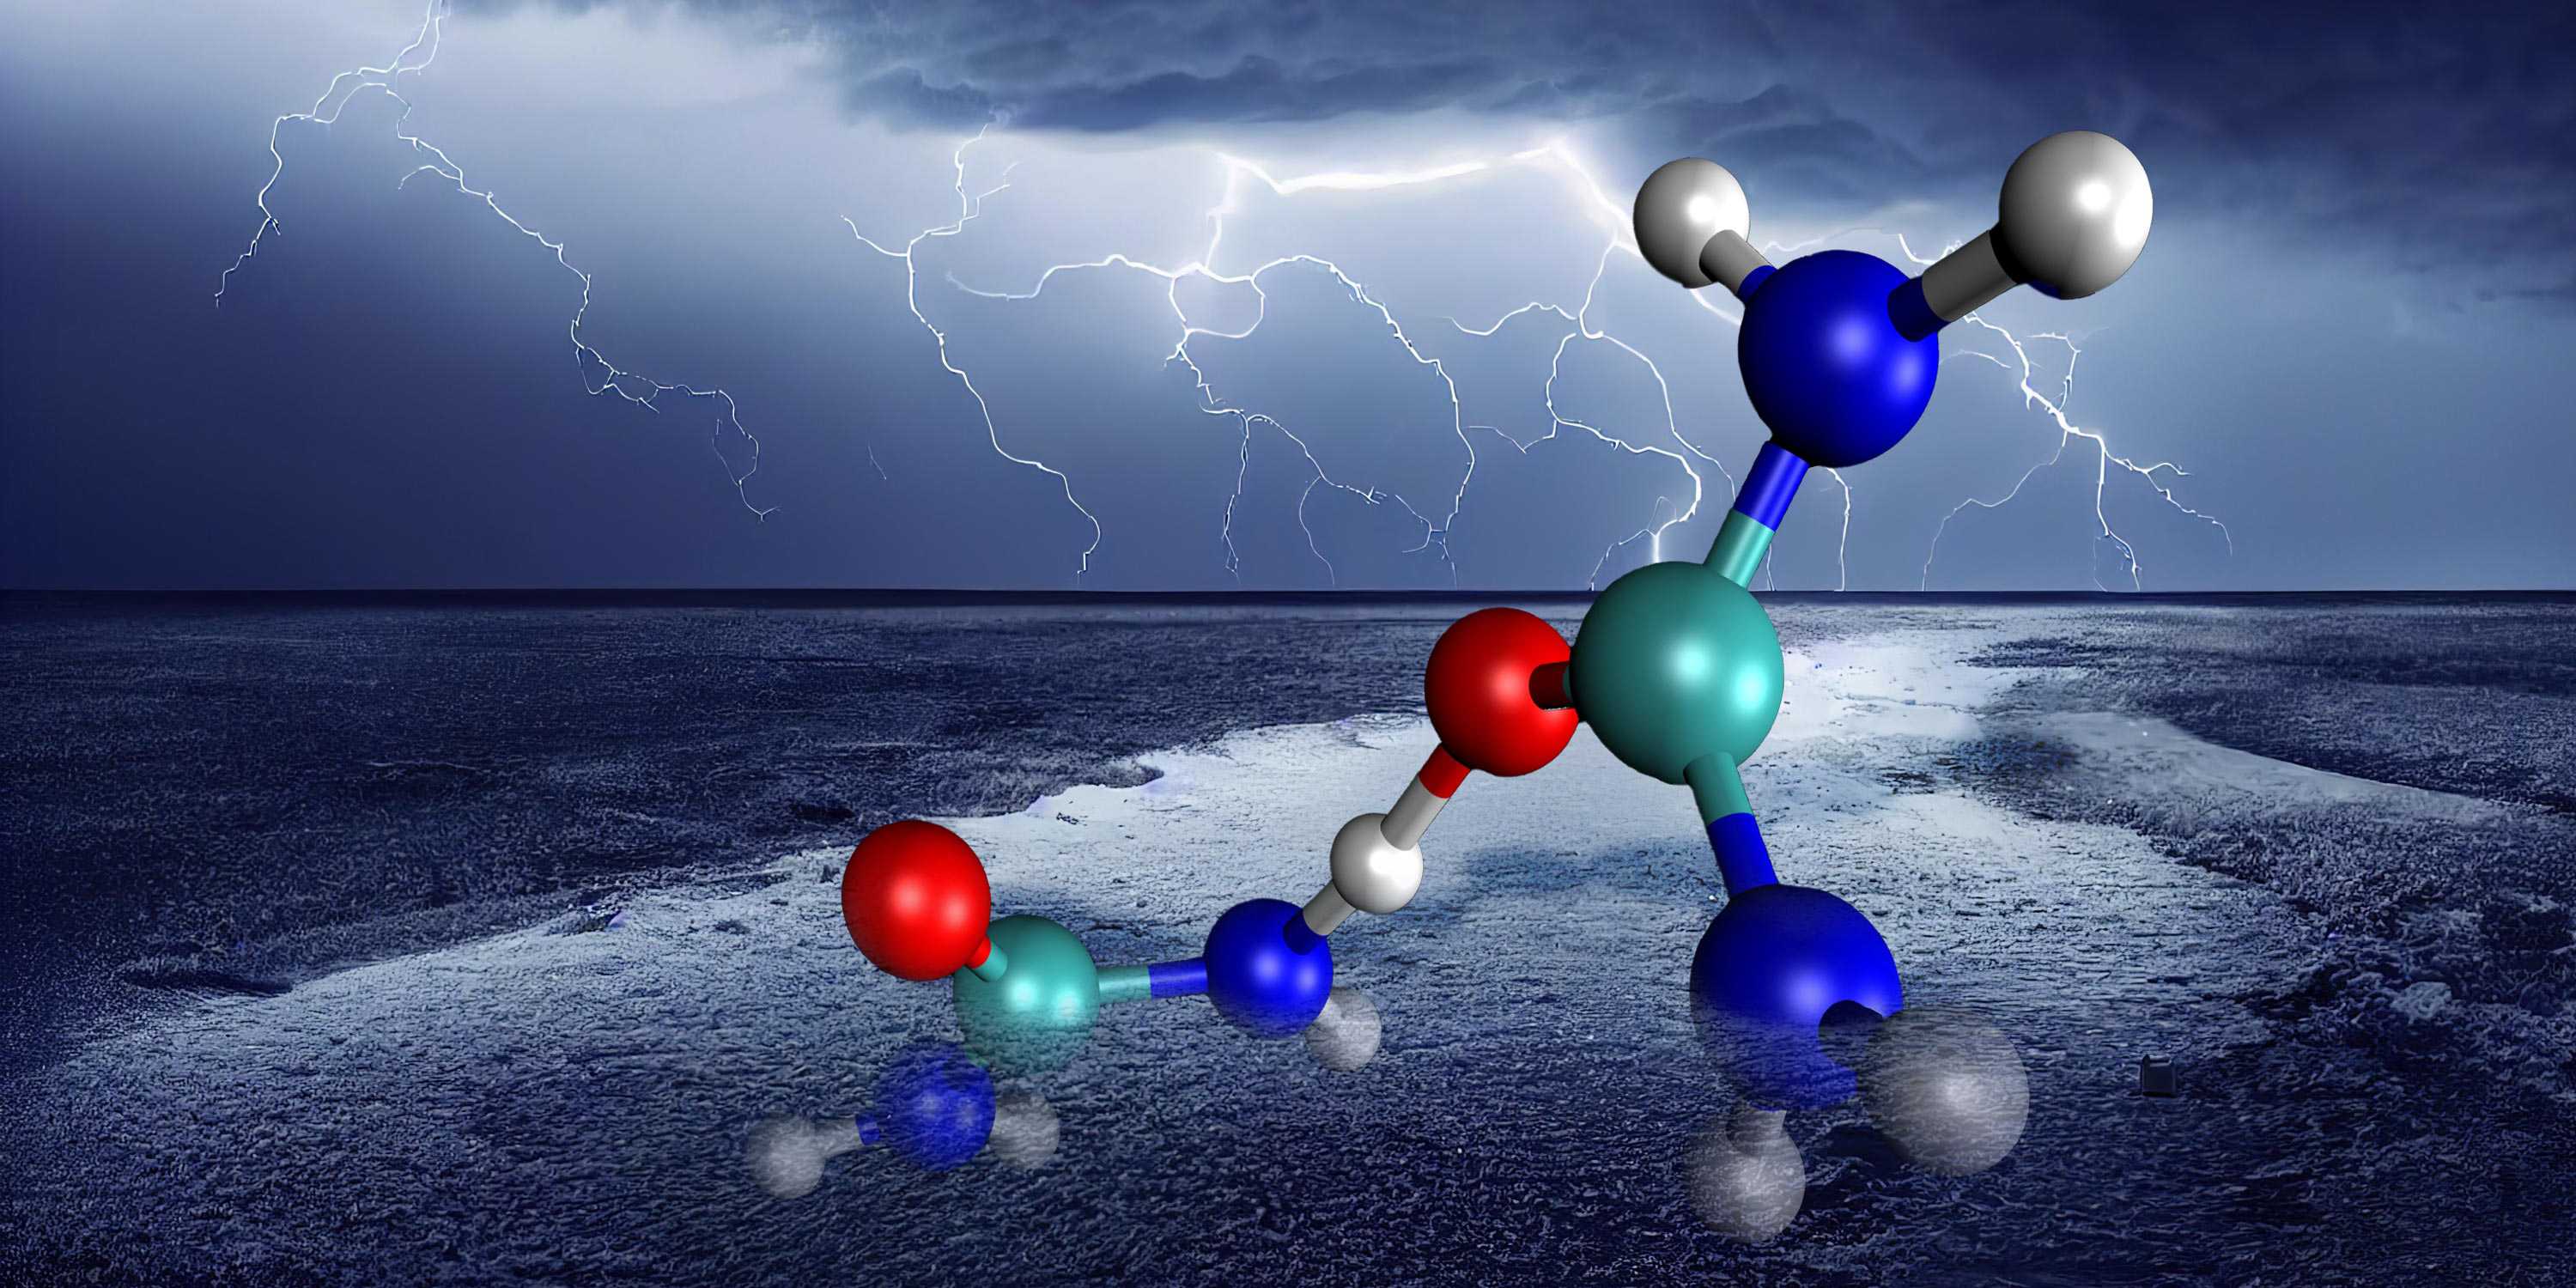 Visualization molecules in the foreground, in the background a thunderstorm